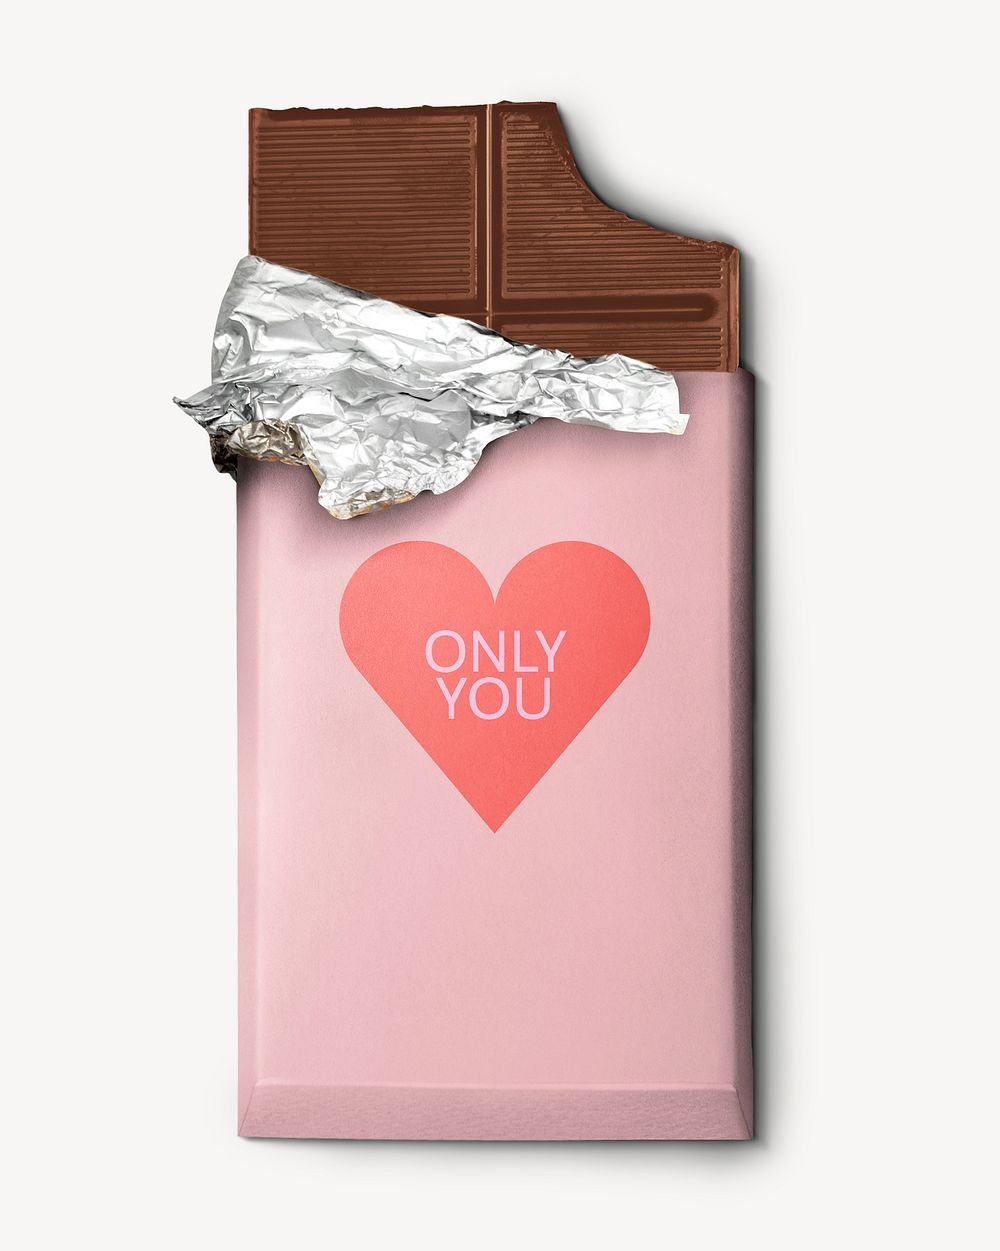 Chocolate packaging mockup psd, valentine’s day gift